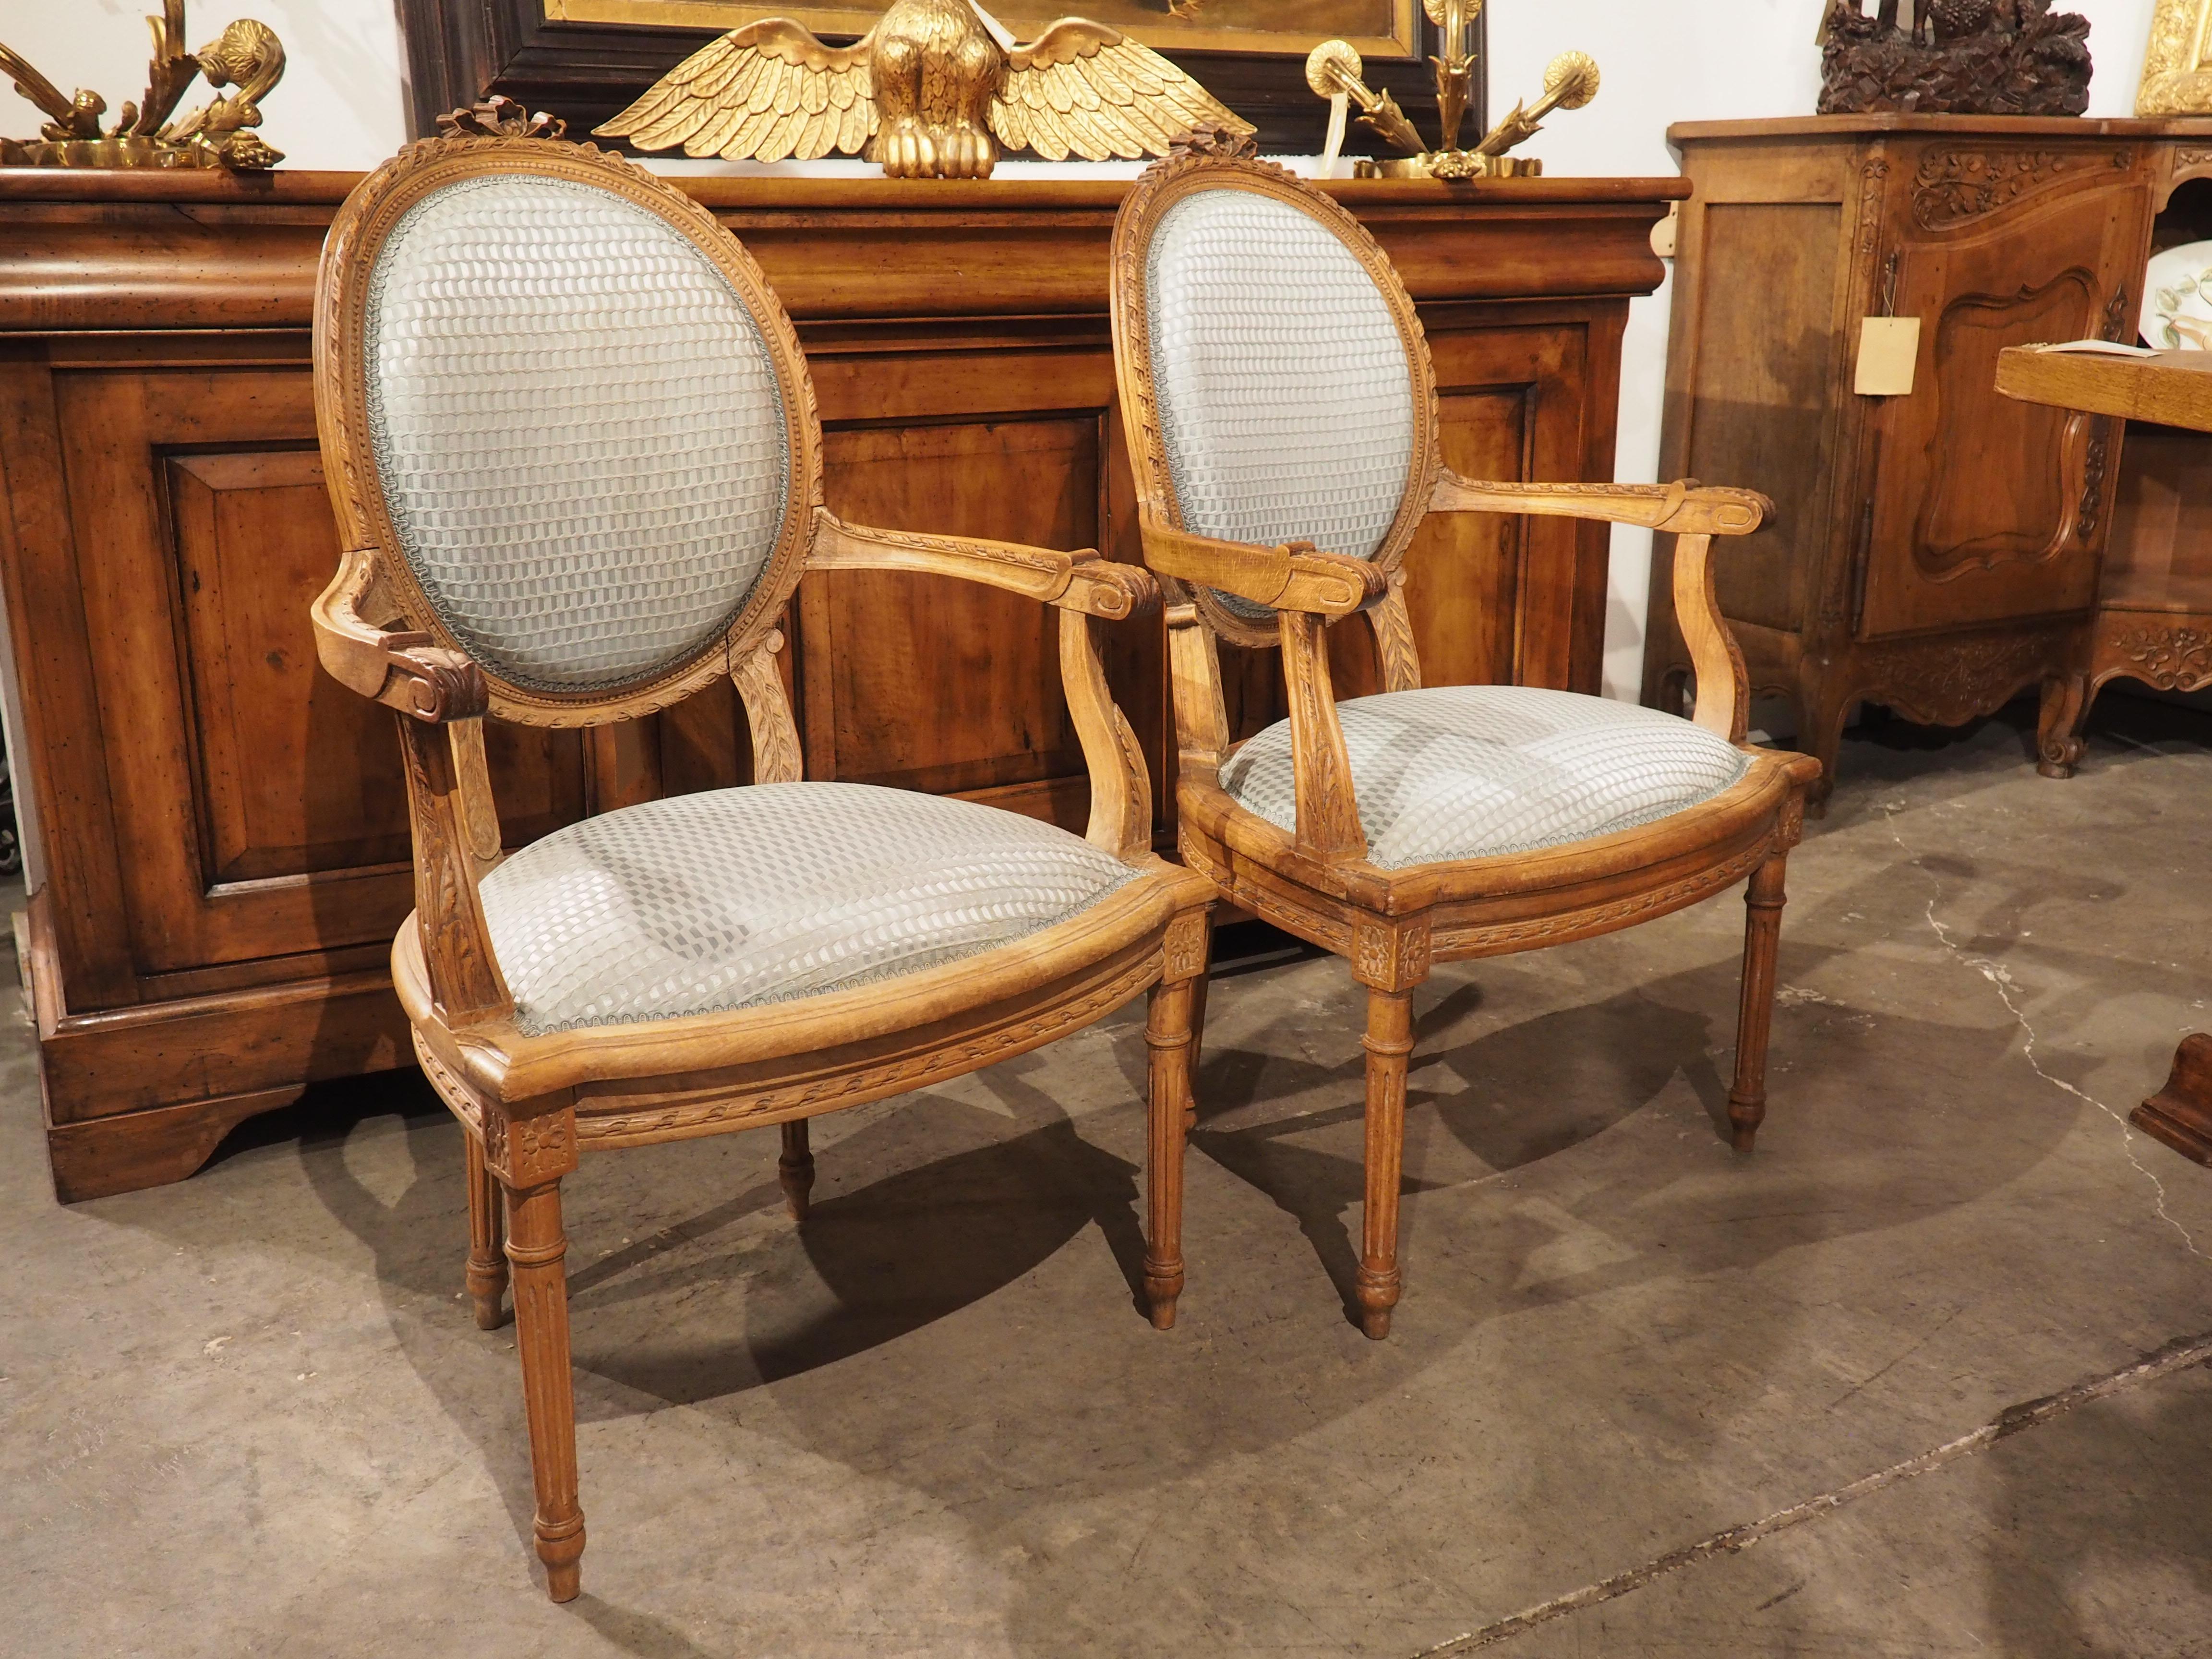 Hand-carved during the early- to mid-1900’s, this pair of French Louis XVI style armchairs has beautiful blue silk upholstery on the seats and back rests. The upholstery has a moiré rippled pattern and a matching sky blue gimp border on each